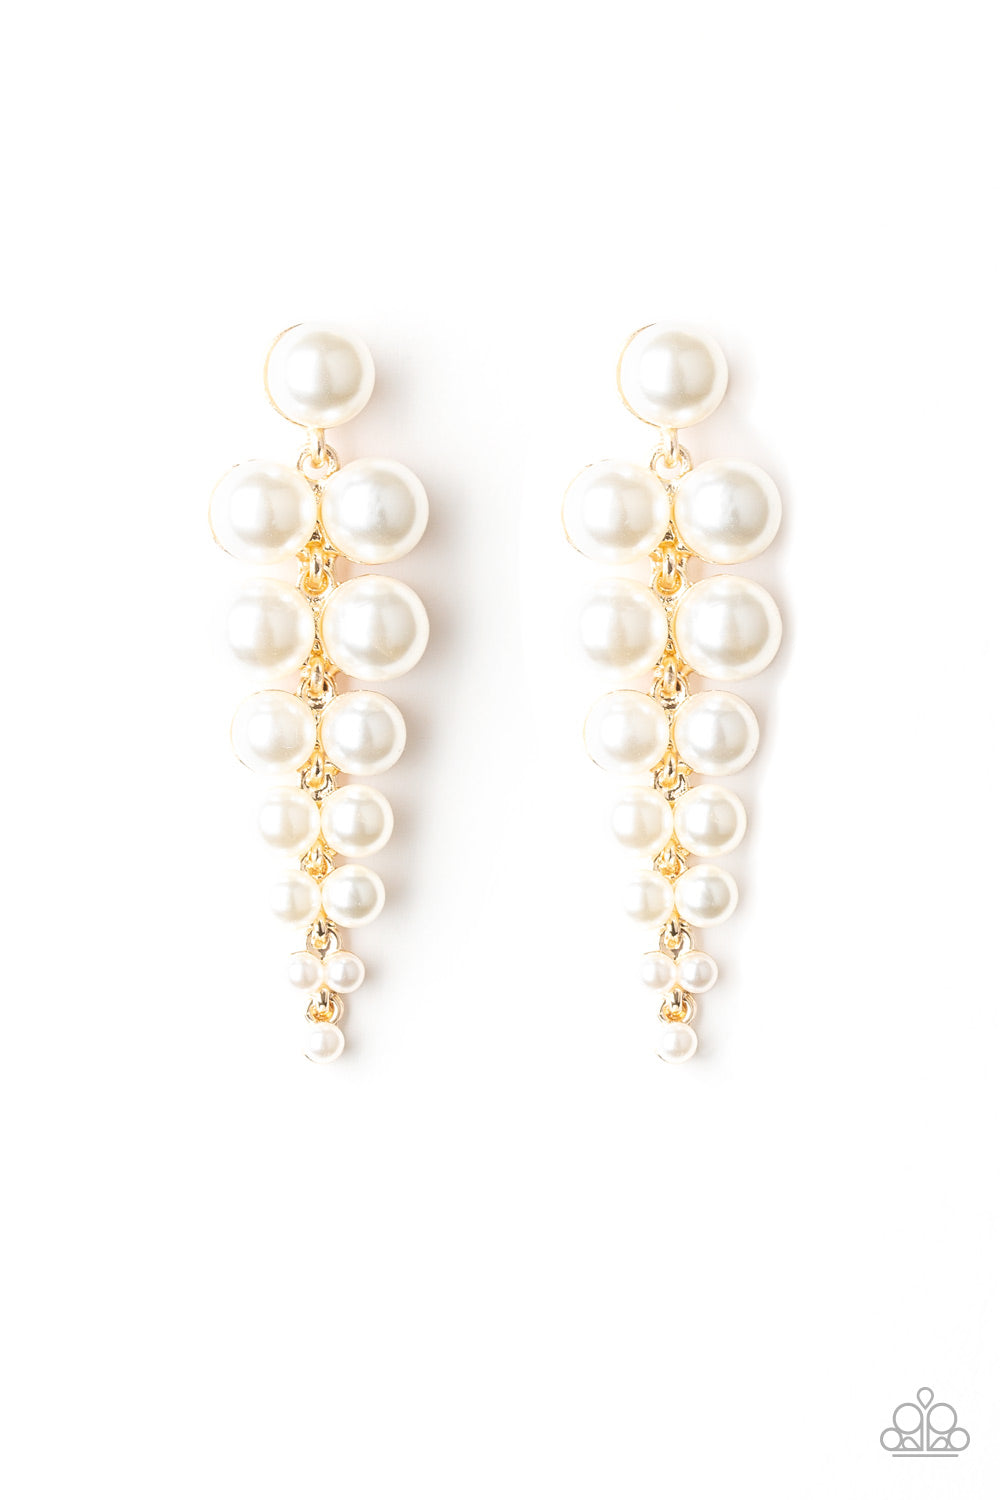 TOTALLY TRIBECA - GOLD PEARLS GRADUATED POST EARRINGS